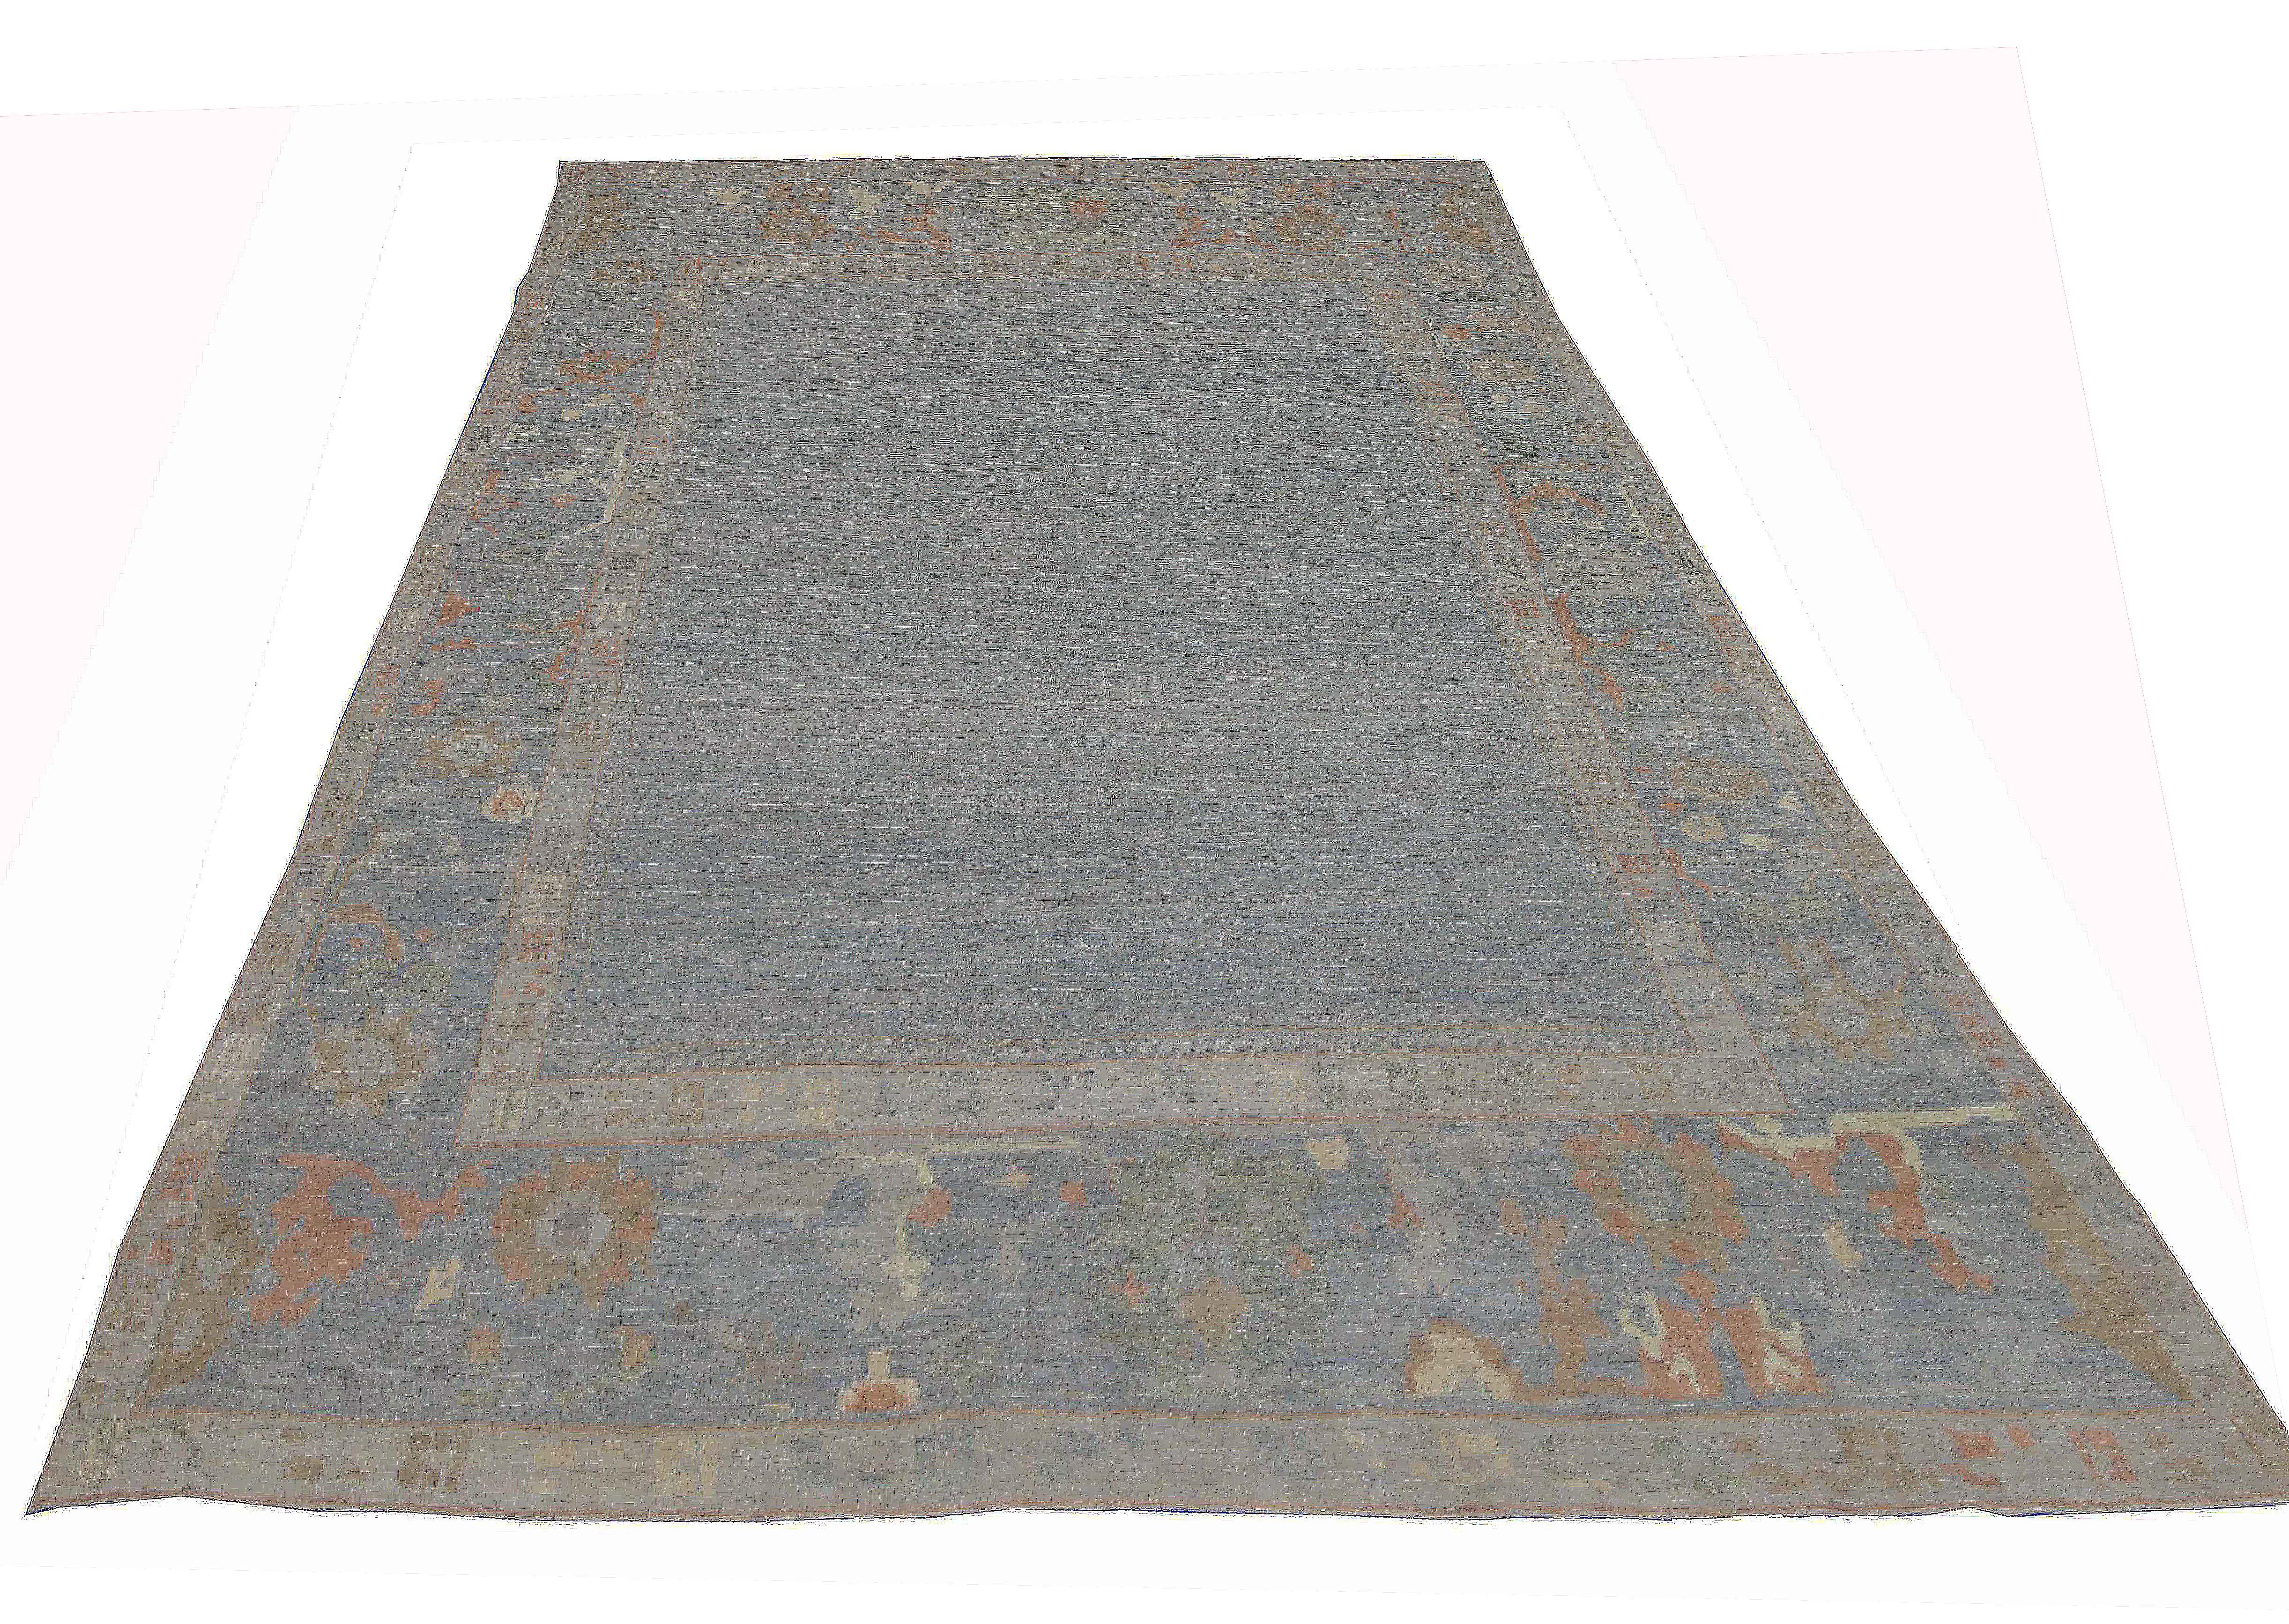 Contemporary Turkish rug made of handwoven sheep’s wool of the finest quality. It’s colored with organic vegetable dyes that are certified safe for humans and pets alike. It features a lovely gray field with rust and beige floral details closely